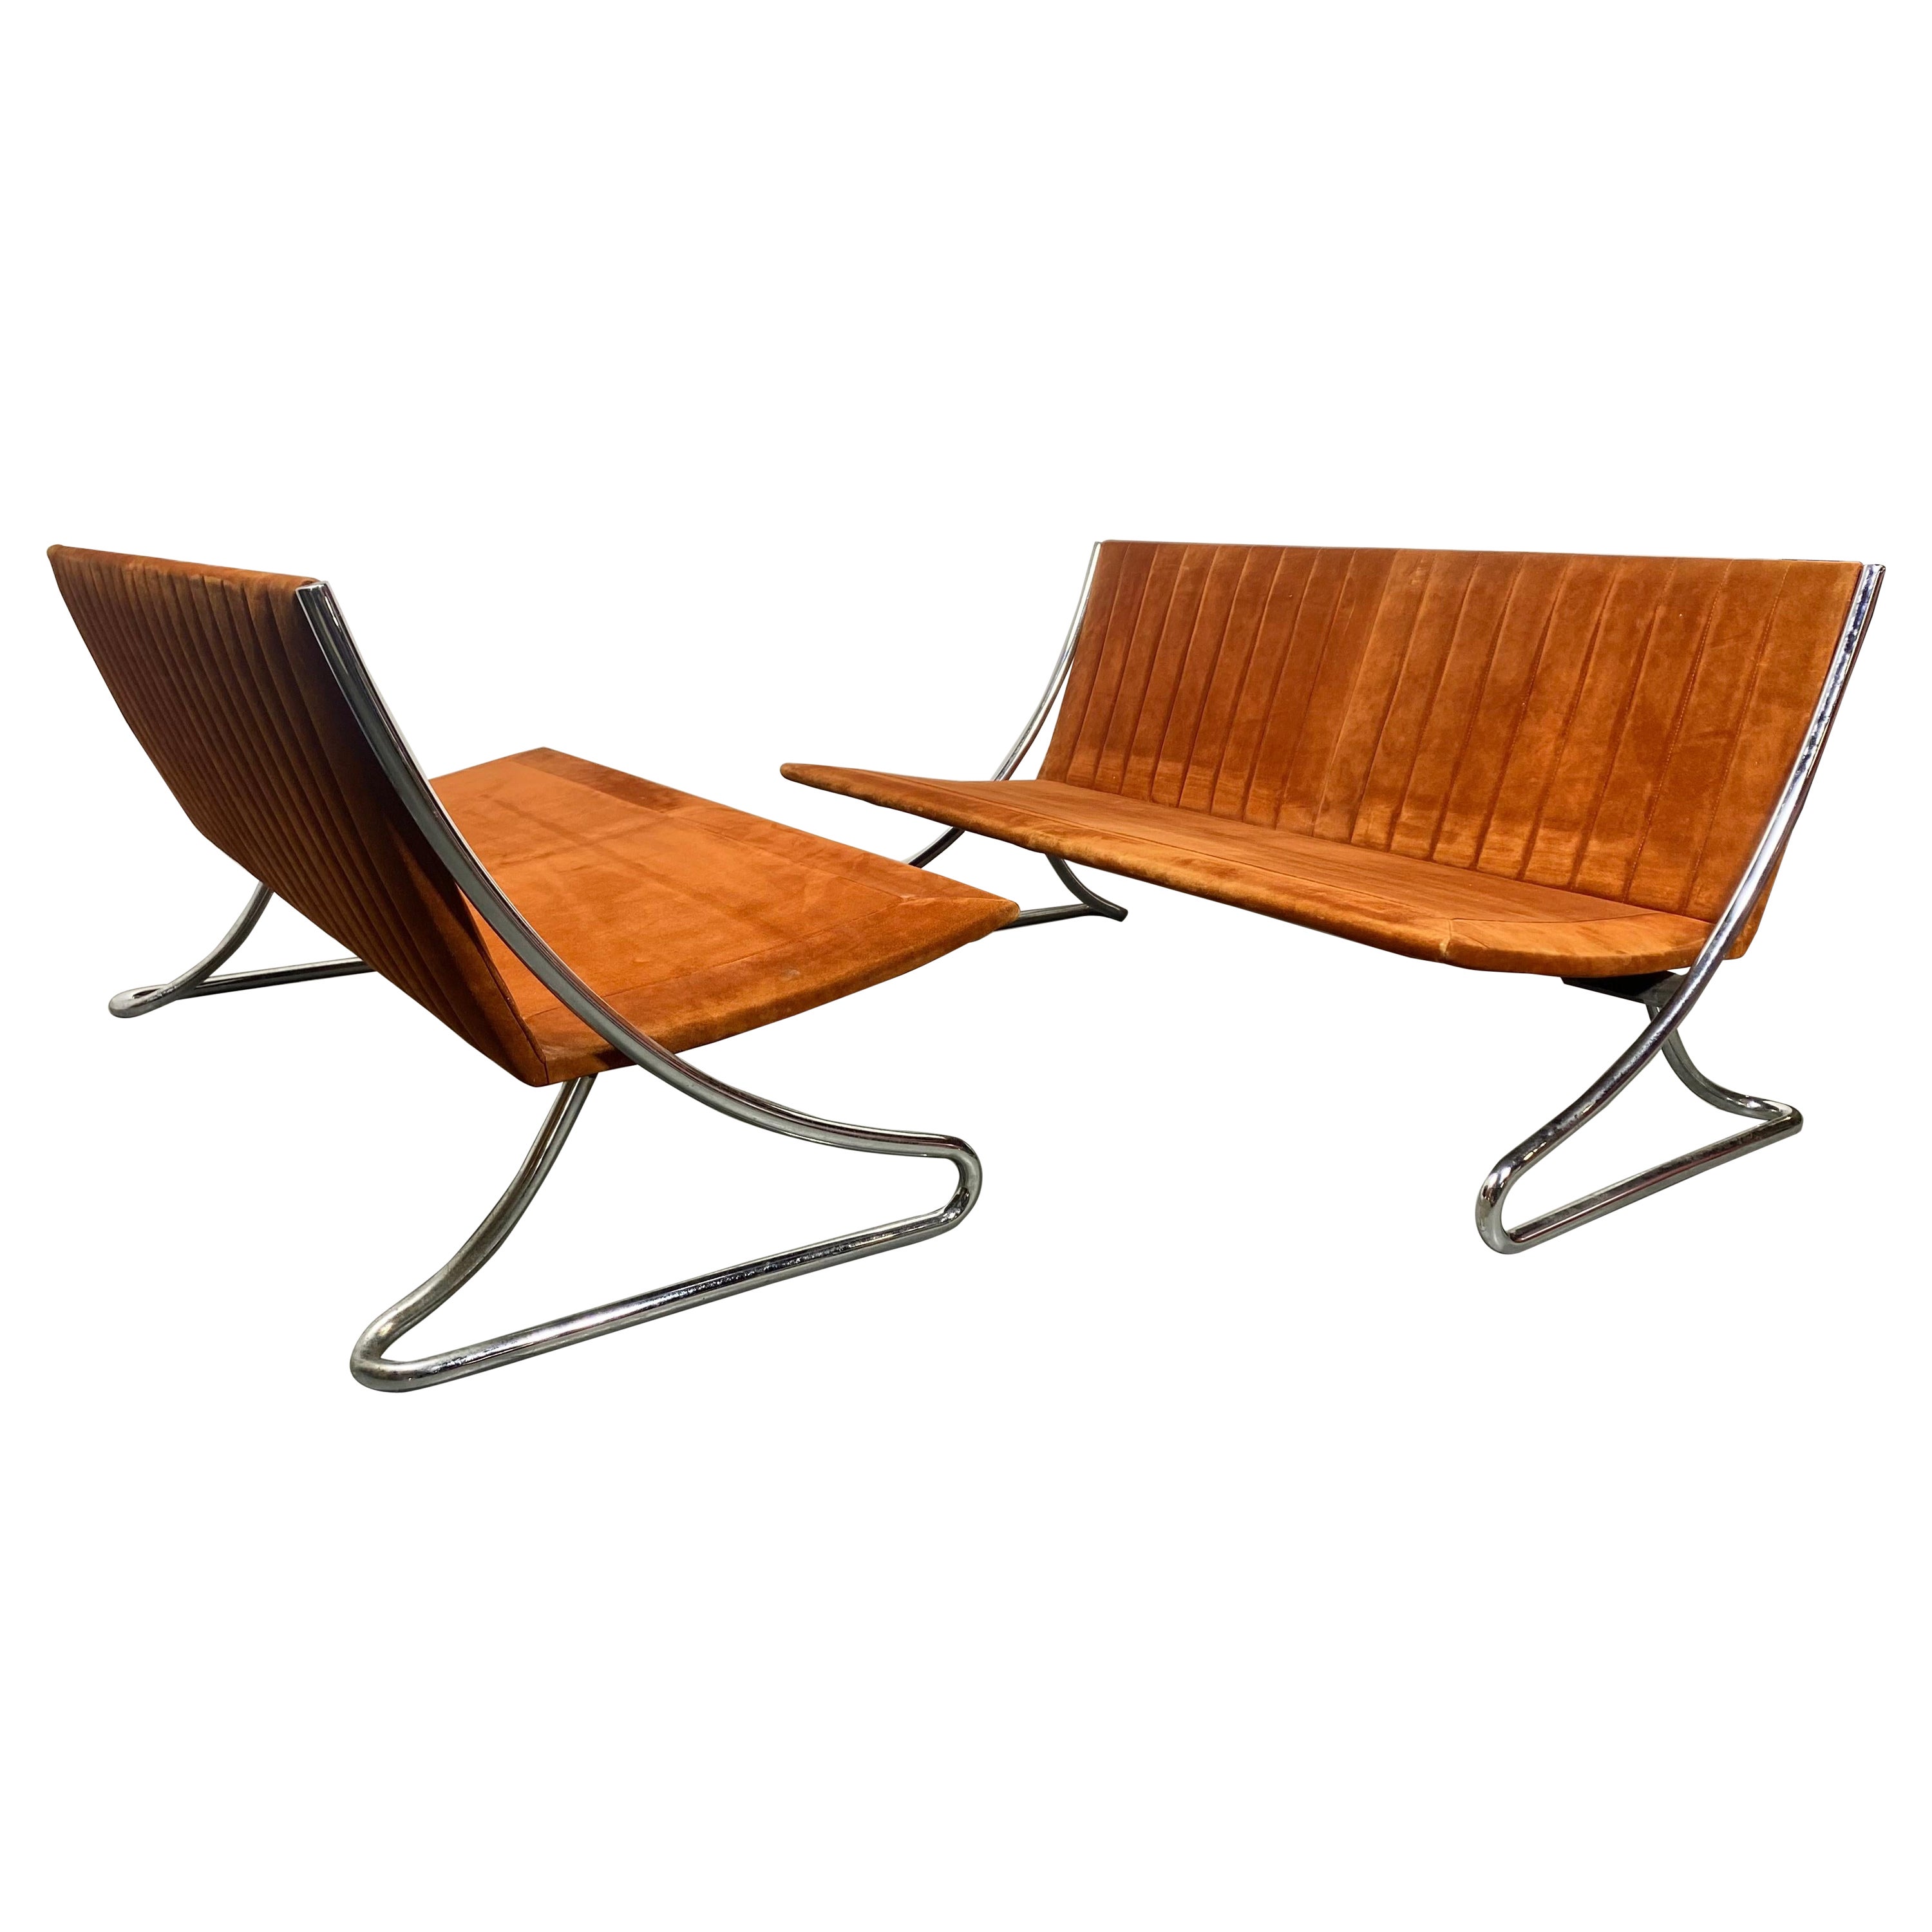 Leif Jacobsen Sette's Steel Frames & Suede Ribbed Upholstery, Modern / Spaceage